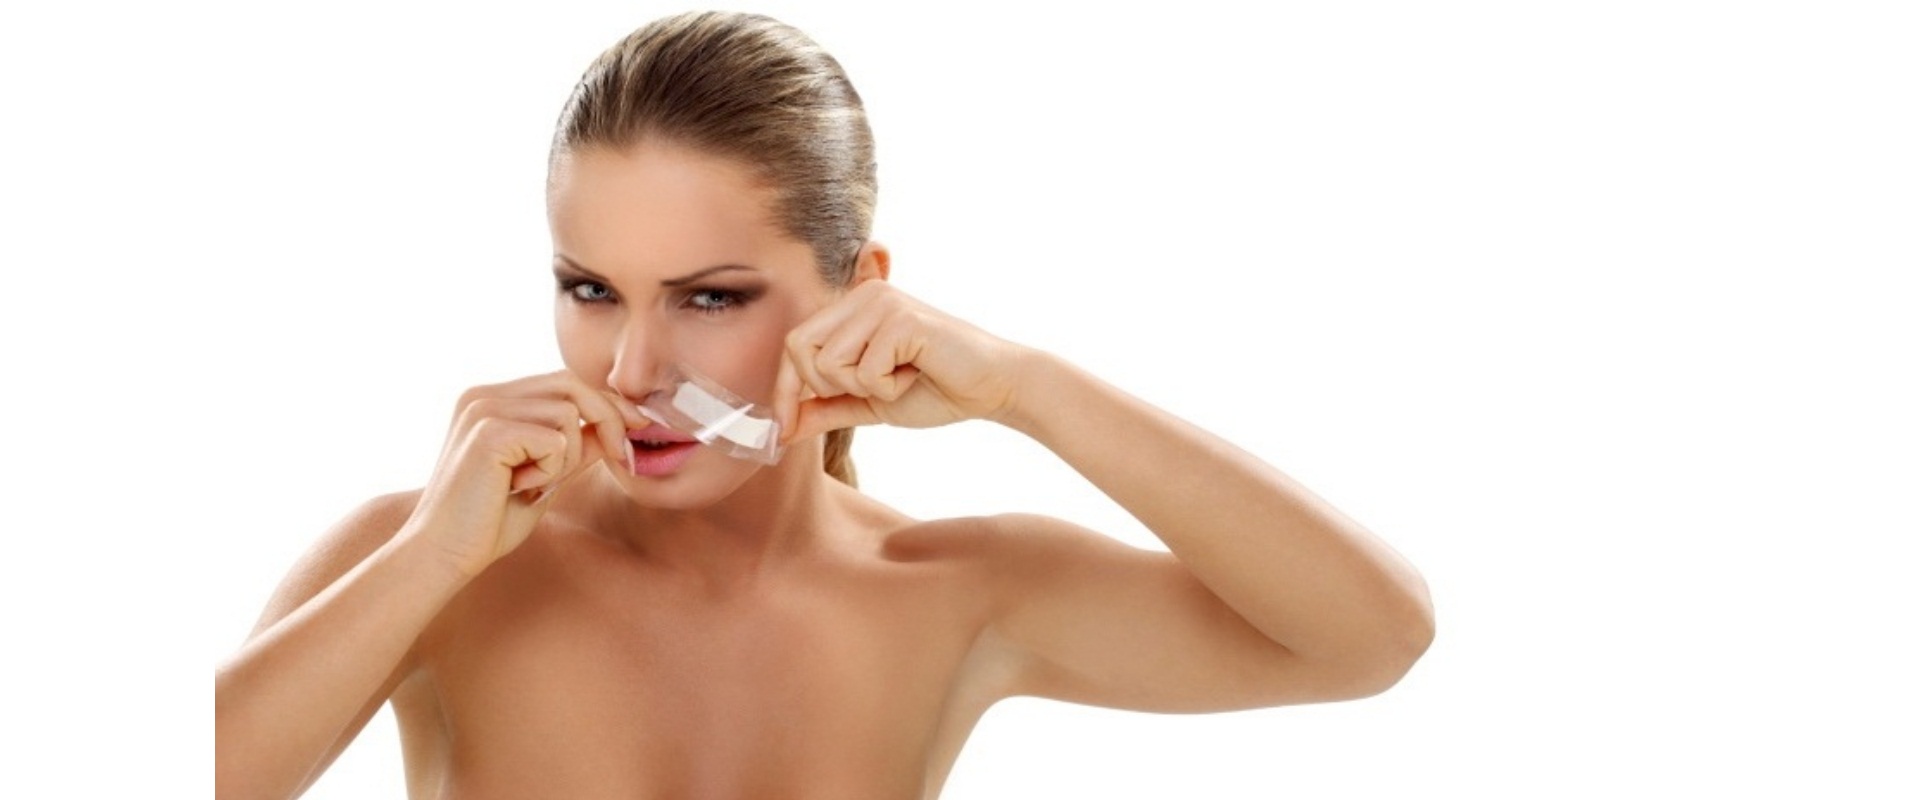 Women facial hair removal insurance coverage